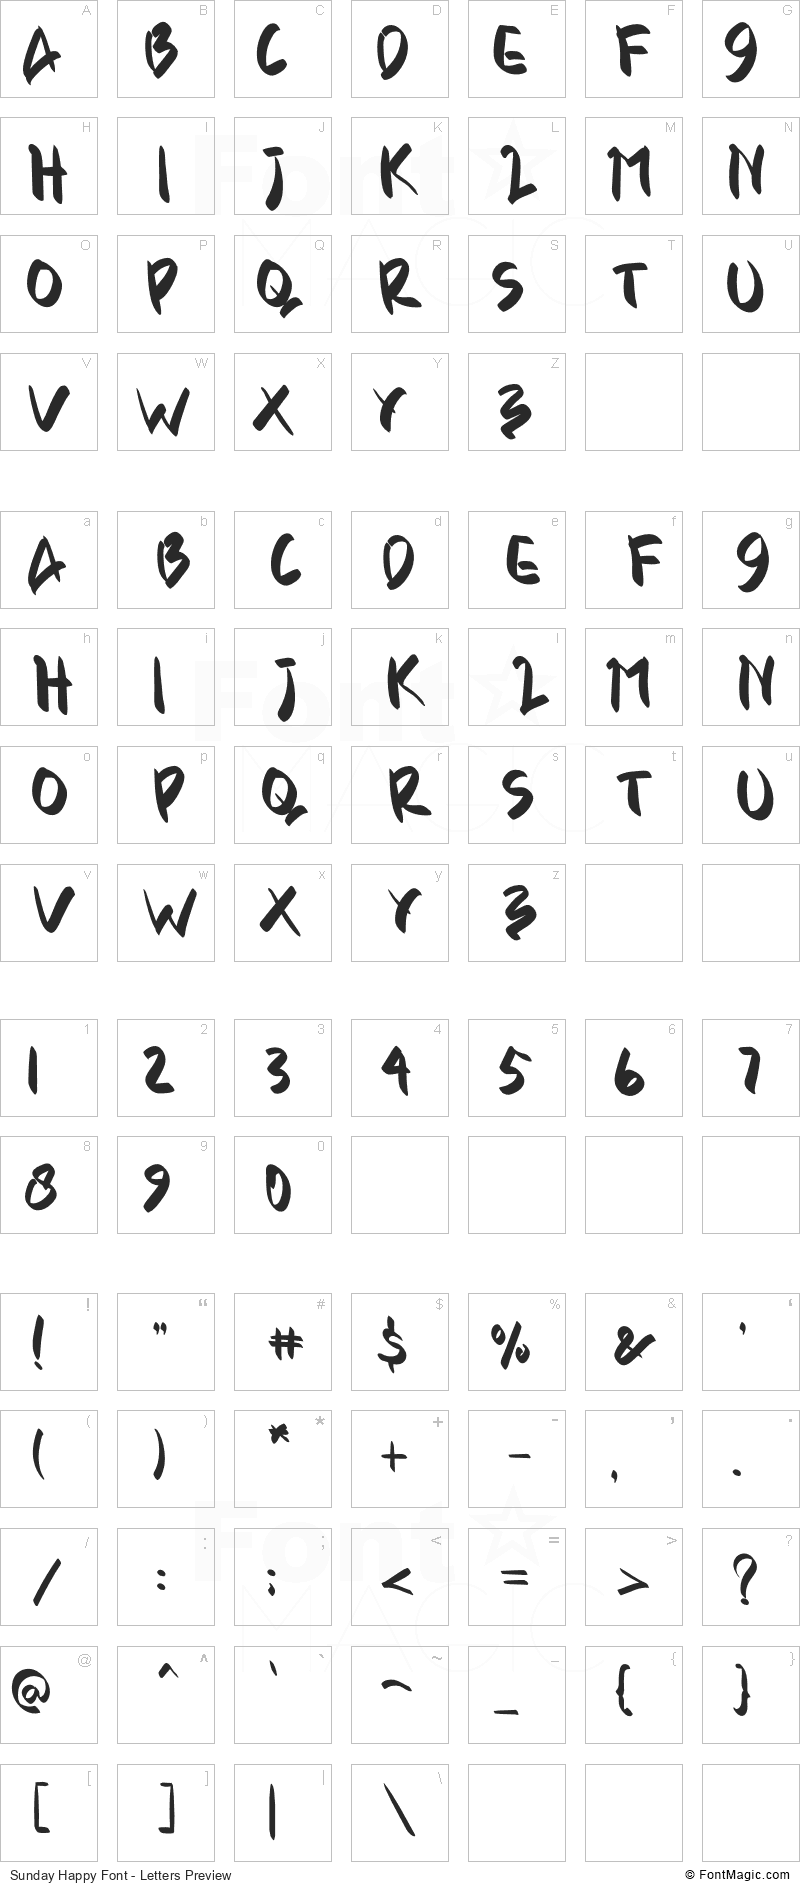 Sunday Happy Font - All Latters Preview Chart